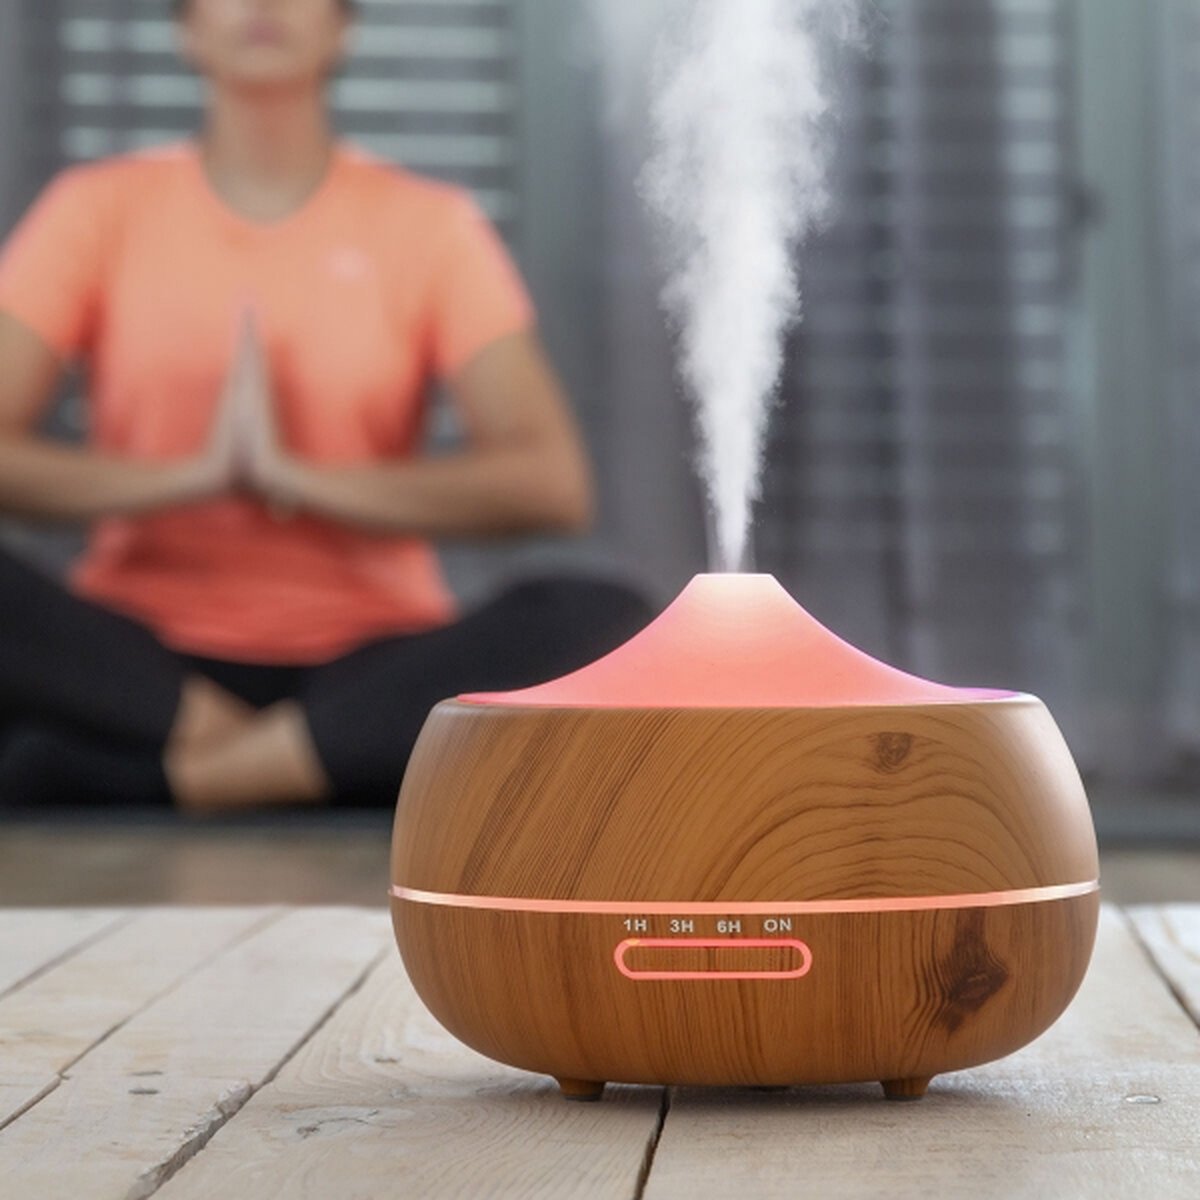 Innovagoods - Aroma diffuser - Luchtbevochtiger - Aroma therapie - Ontspanning